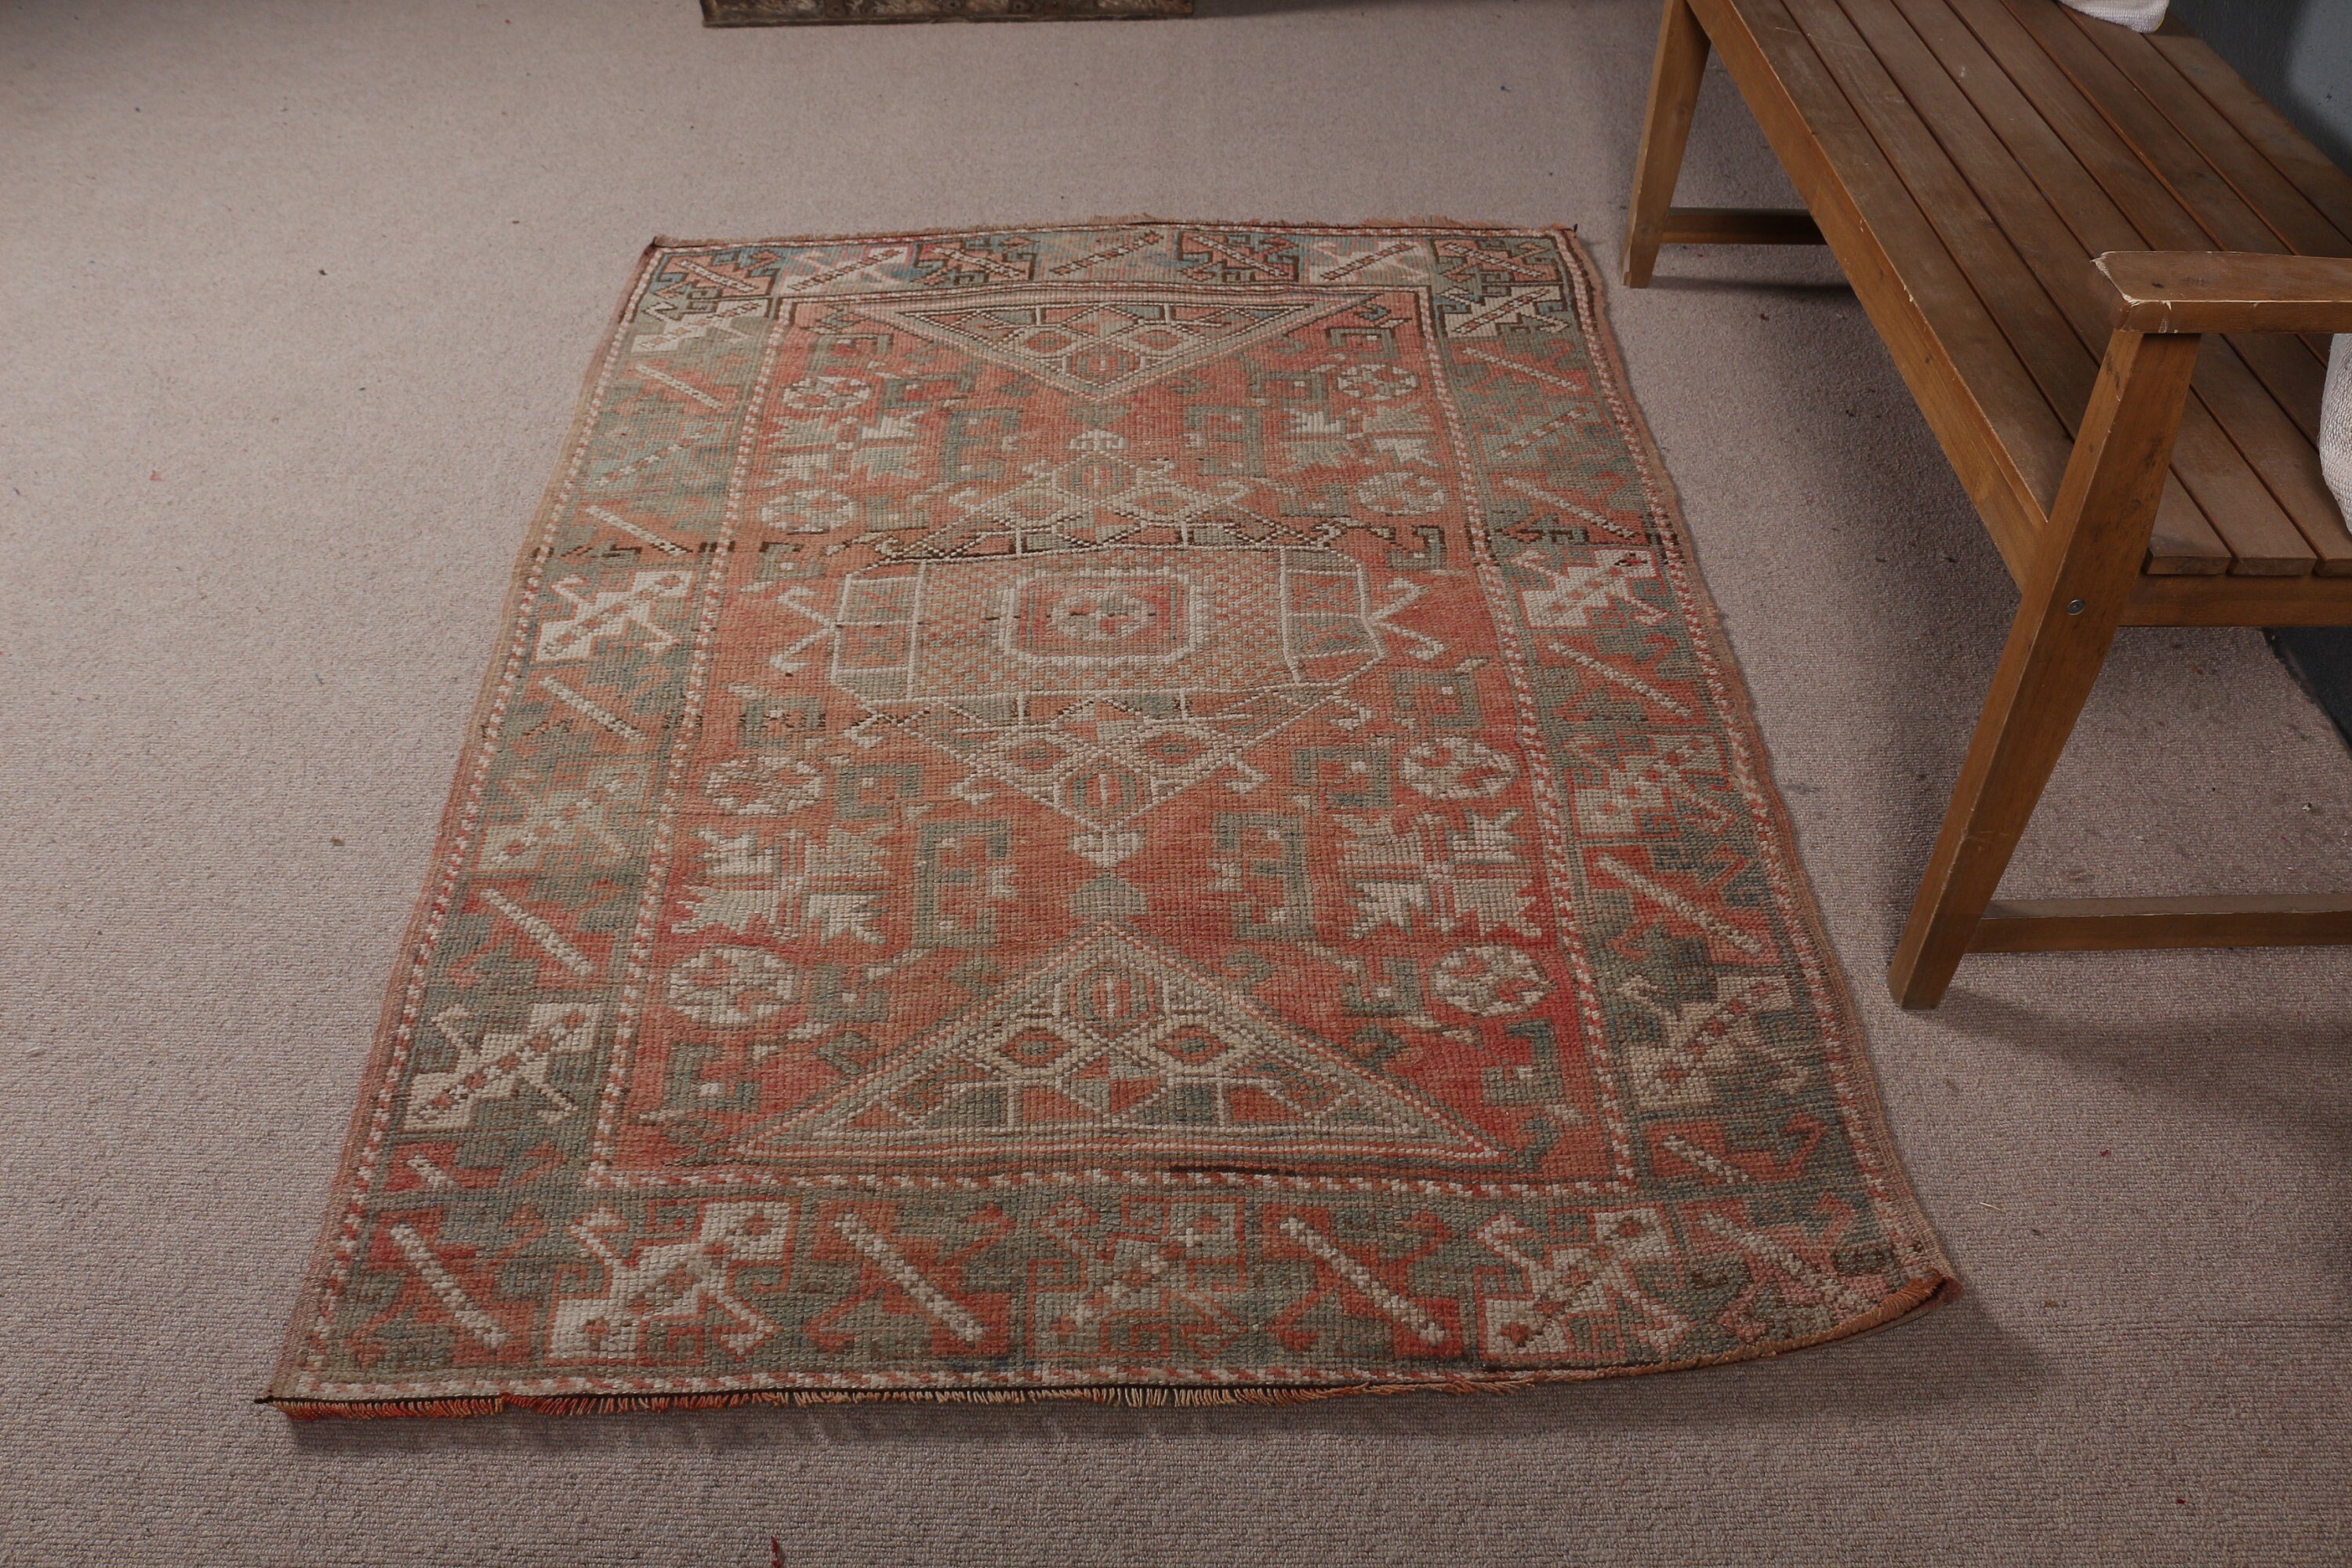 Vintage Rug, Oriental Rug, Rugs for Entry, Entry Rug, Red Antique Rug, 4x5.5 ft Accent Rugs, Bedroom Rugs, Turkish Rugs